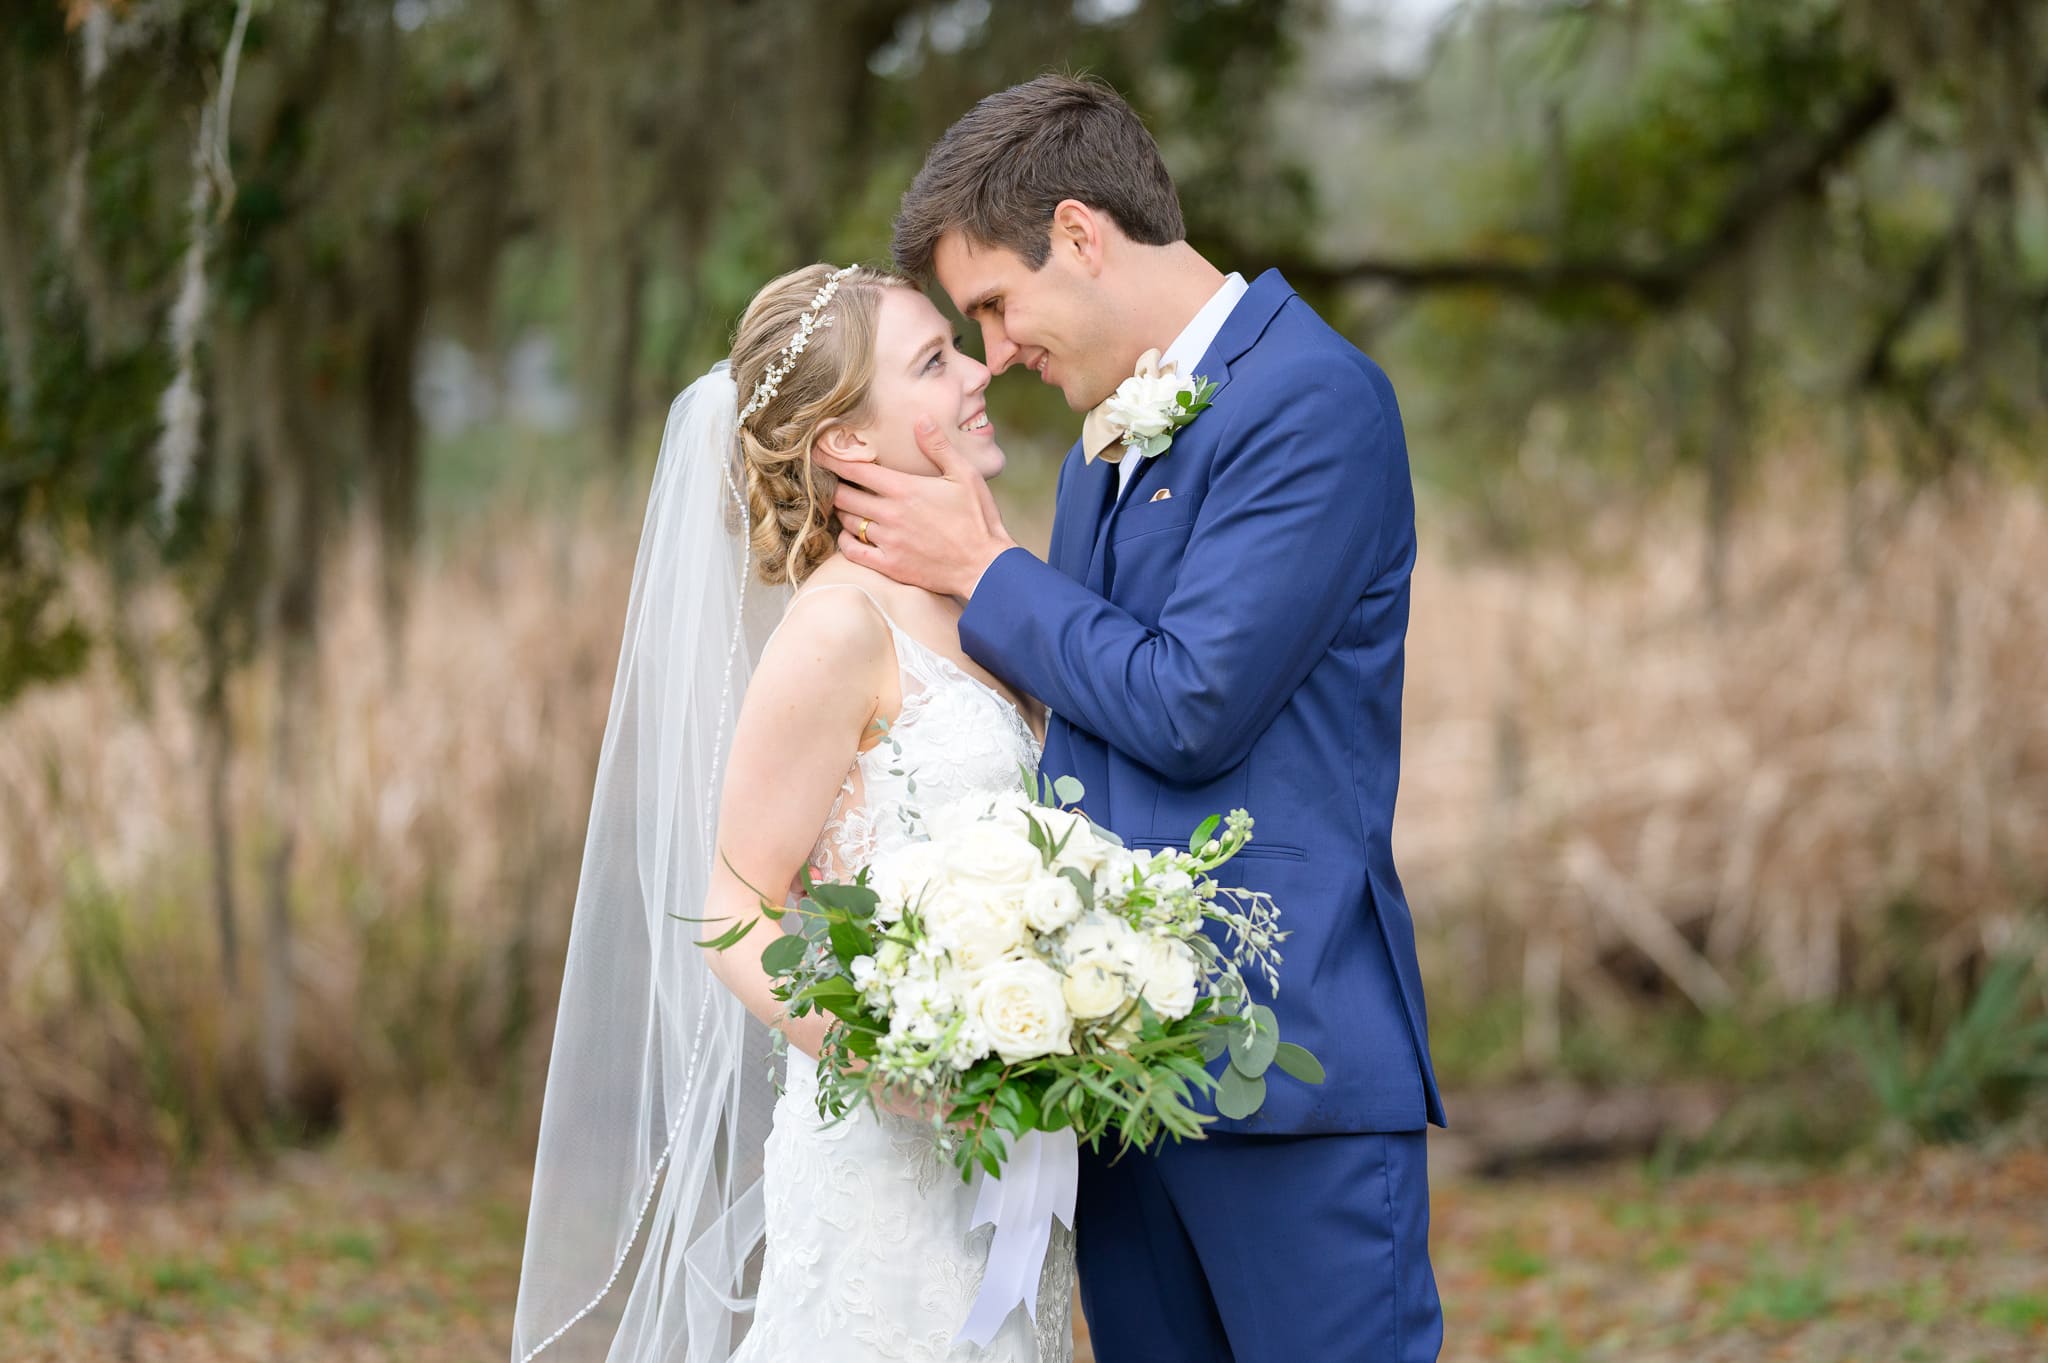 Looking into each other's eyes with big smiles - Pawleys Plantation Golf & Country Club